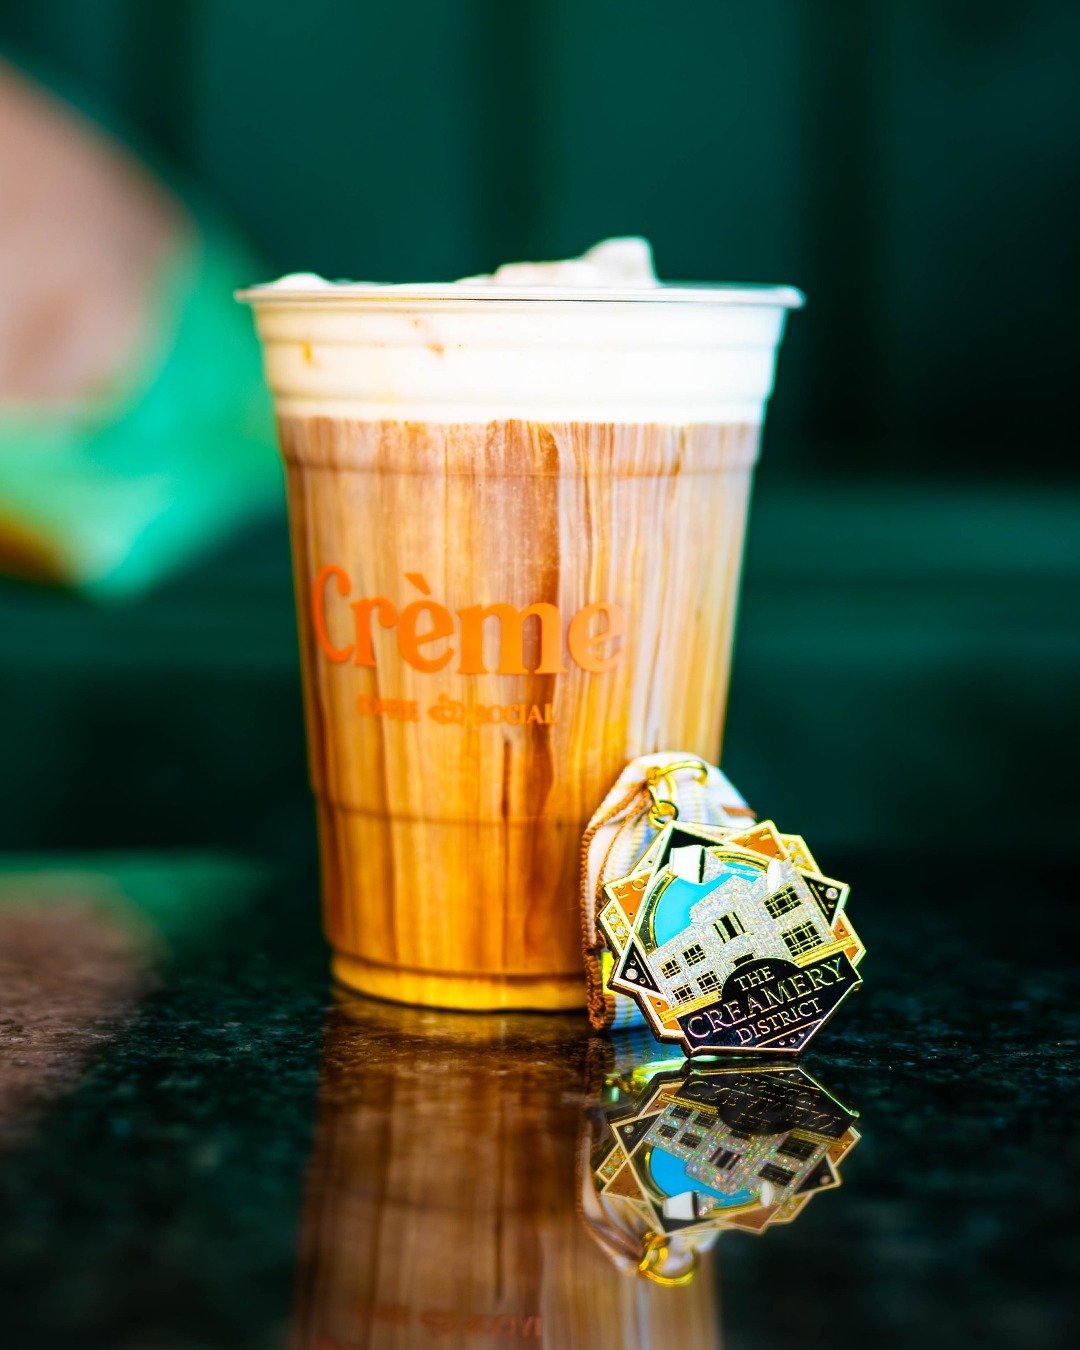 Let's kick off Fiesta season with a caffeinated bang + our medal special! 🎉☕🎖️

Beginning today through April 28th, you can get our Creamery District medal for $2, when you purchase an iced coffee!

📍 875 E. Ashby Place, Suite 1115